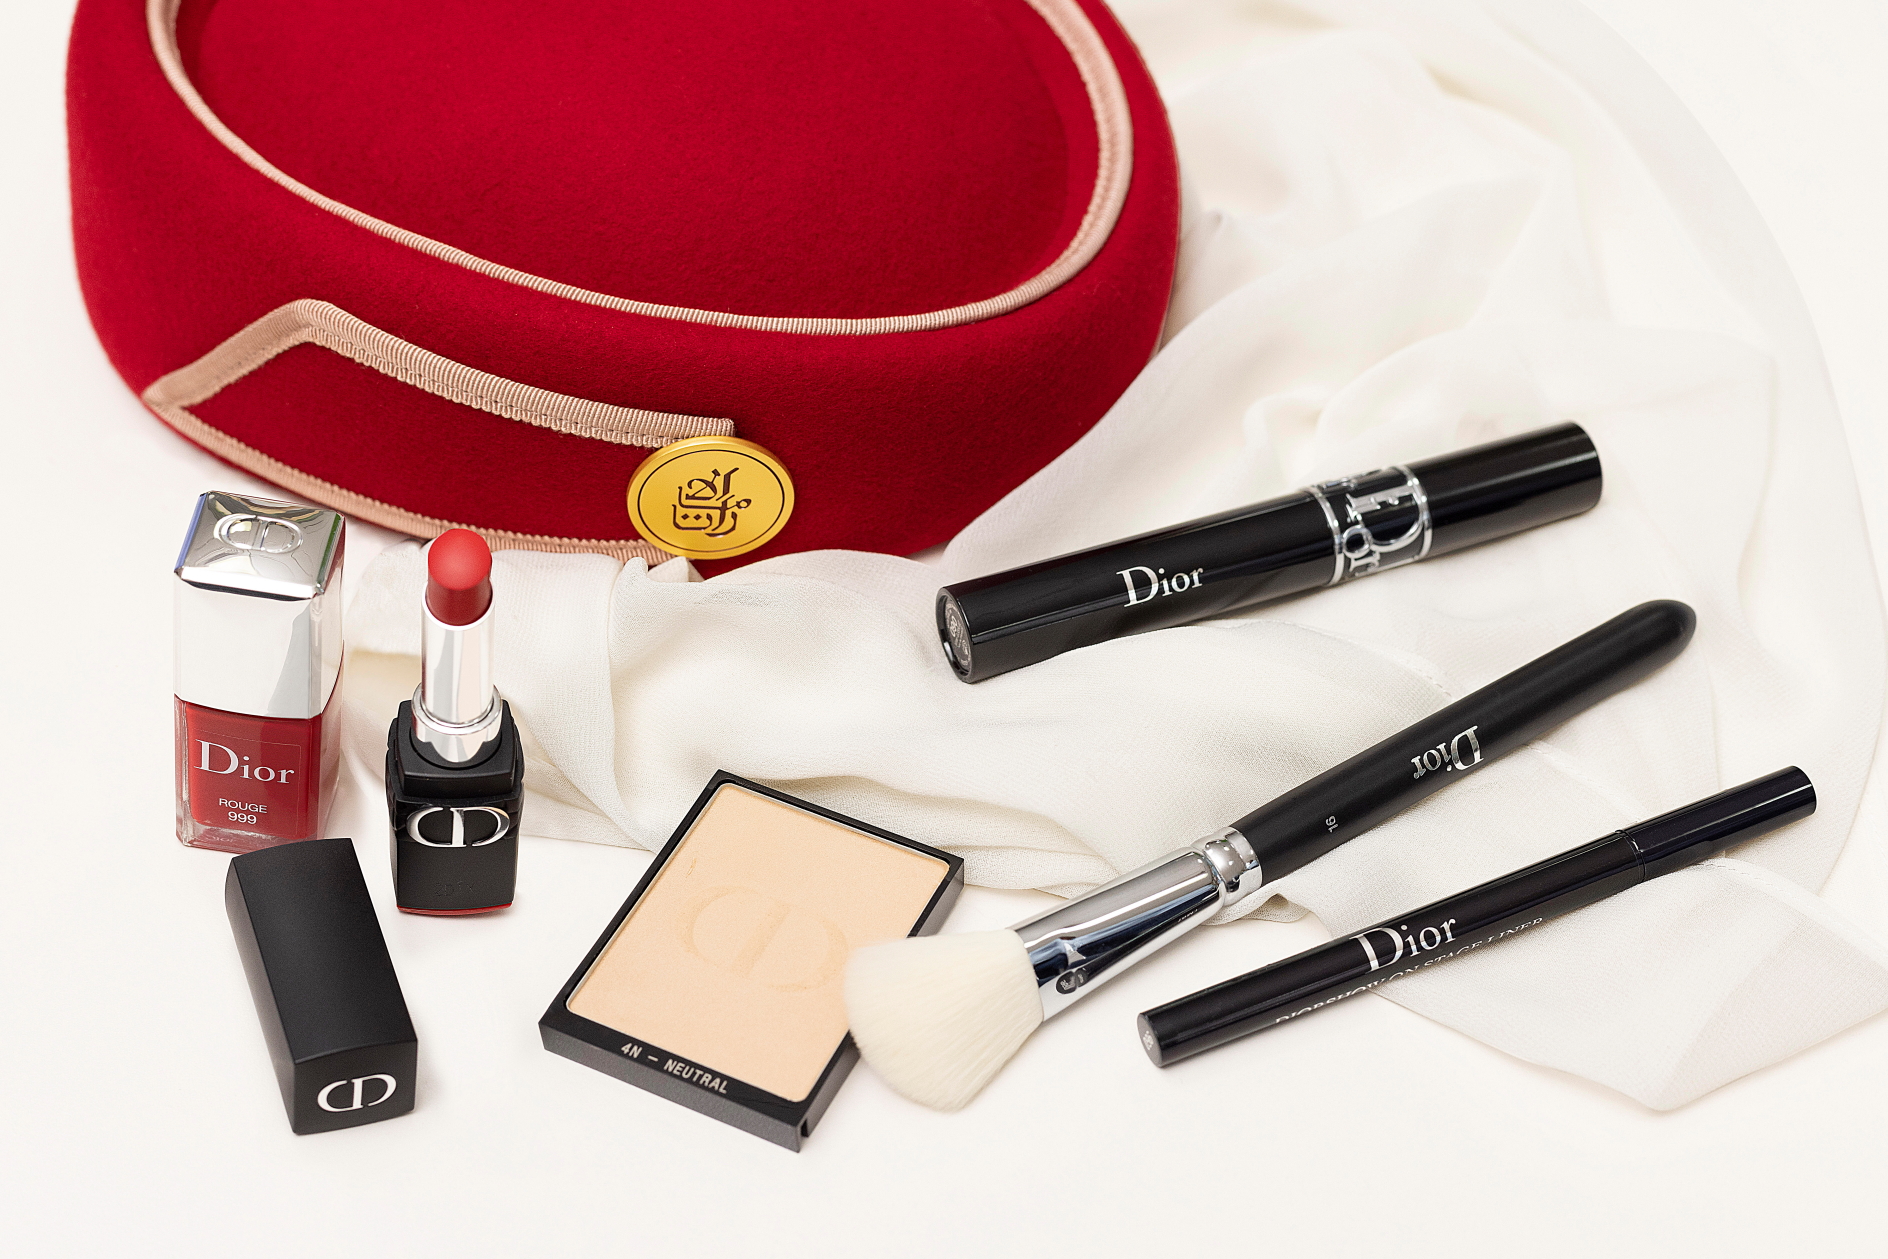 Emirates has partnered with Dior and Davines to open a Cabin Crew Beauty Hub in Dubai. Click to enlarge.